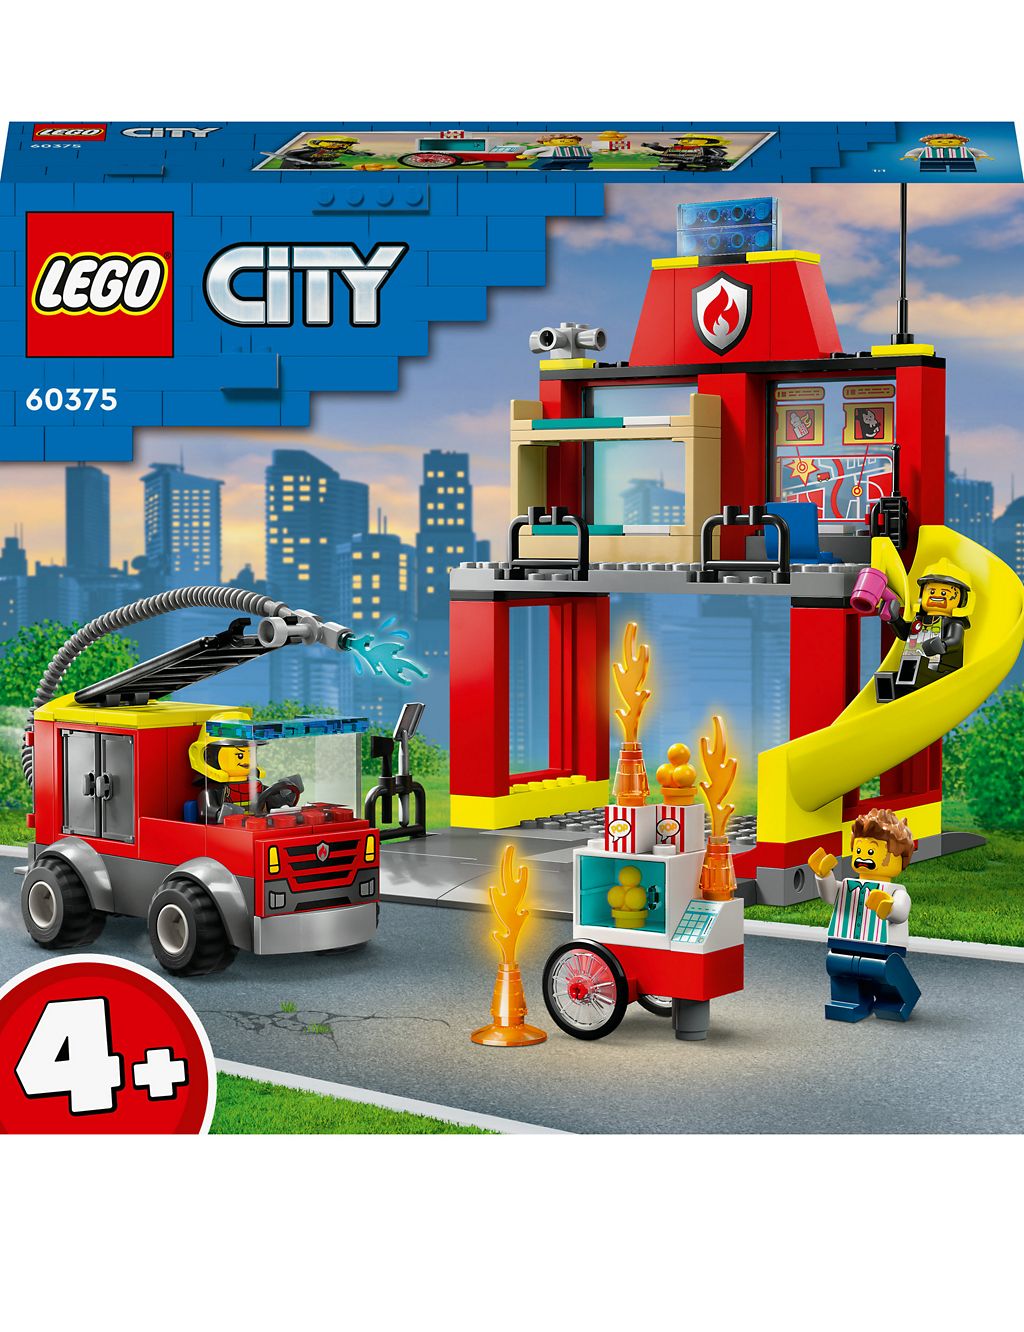 LEGO City Fire Station and Fire Engine Toys 60375 (4+ Yrs) 2 of 6